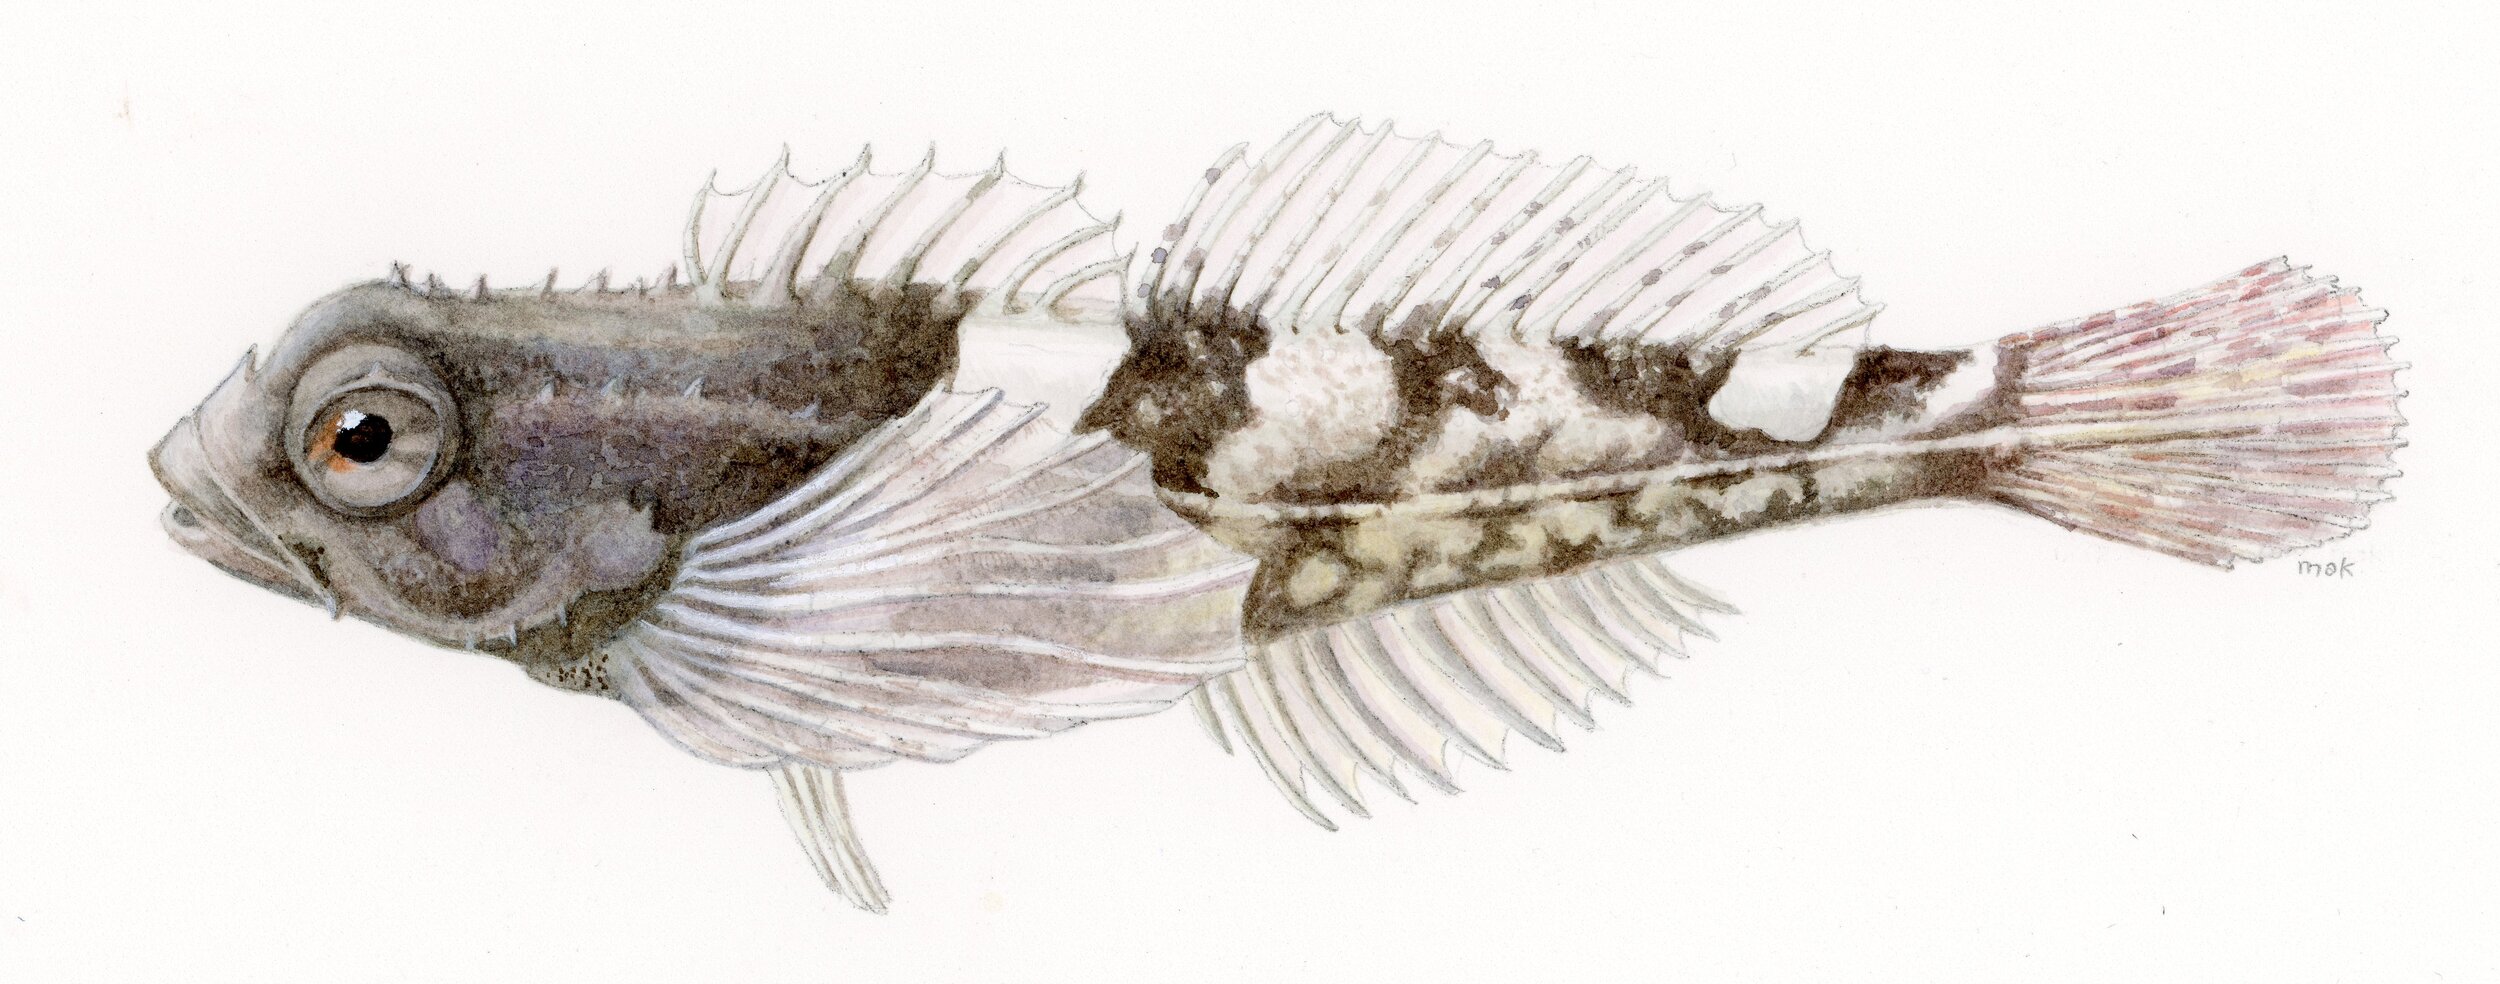 Final Tidepool sculpin painting cropped.jpg